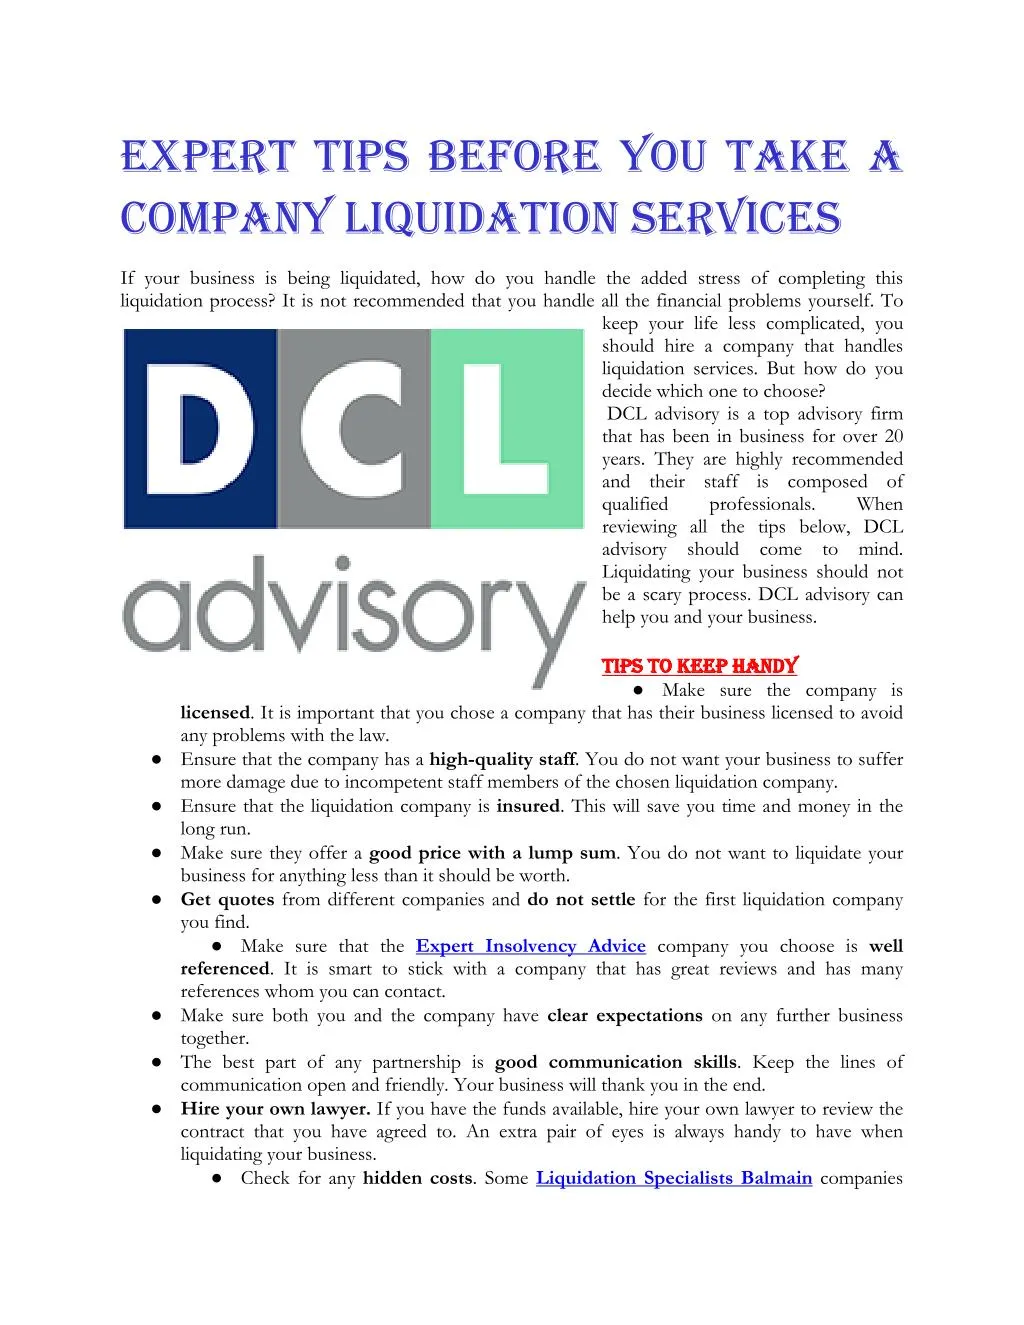 expert tips before you take a company liquidation